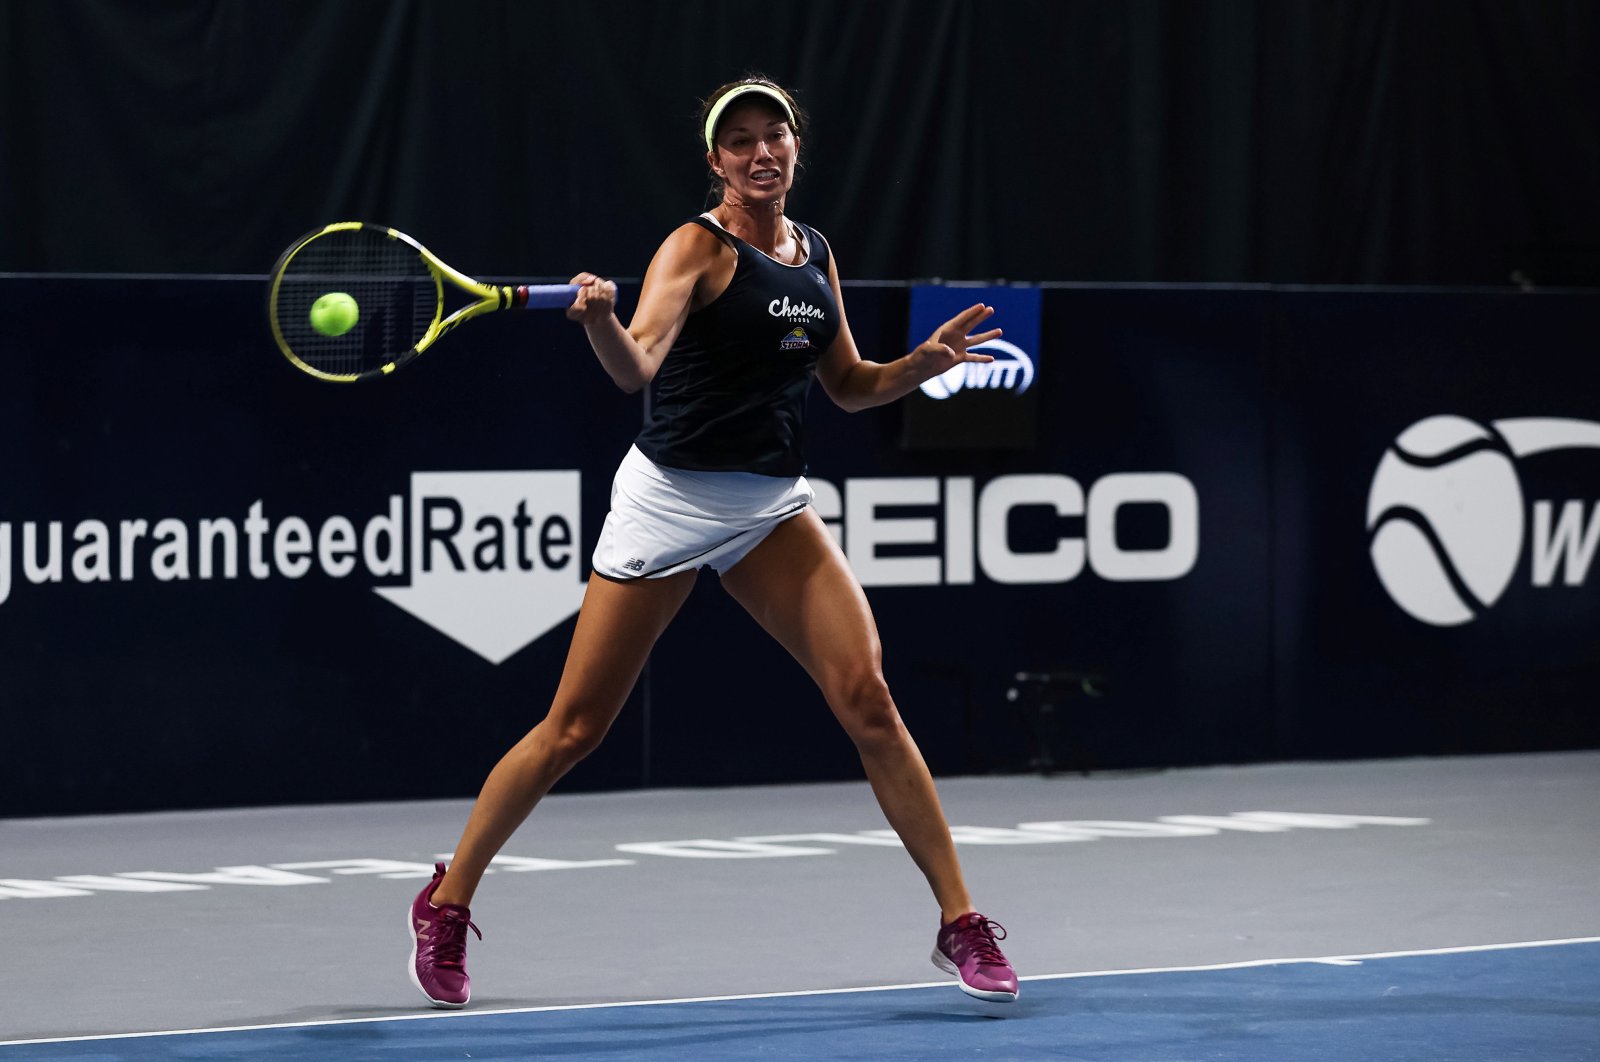  Danielle Collins in action during a World TeamTennis match in Greenbrier, West Virginia, U.S., July 16, 2020. (Reuters Photo)